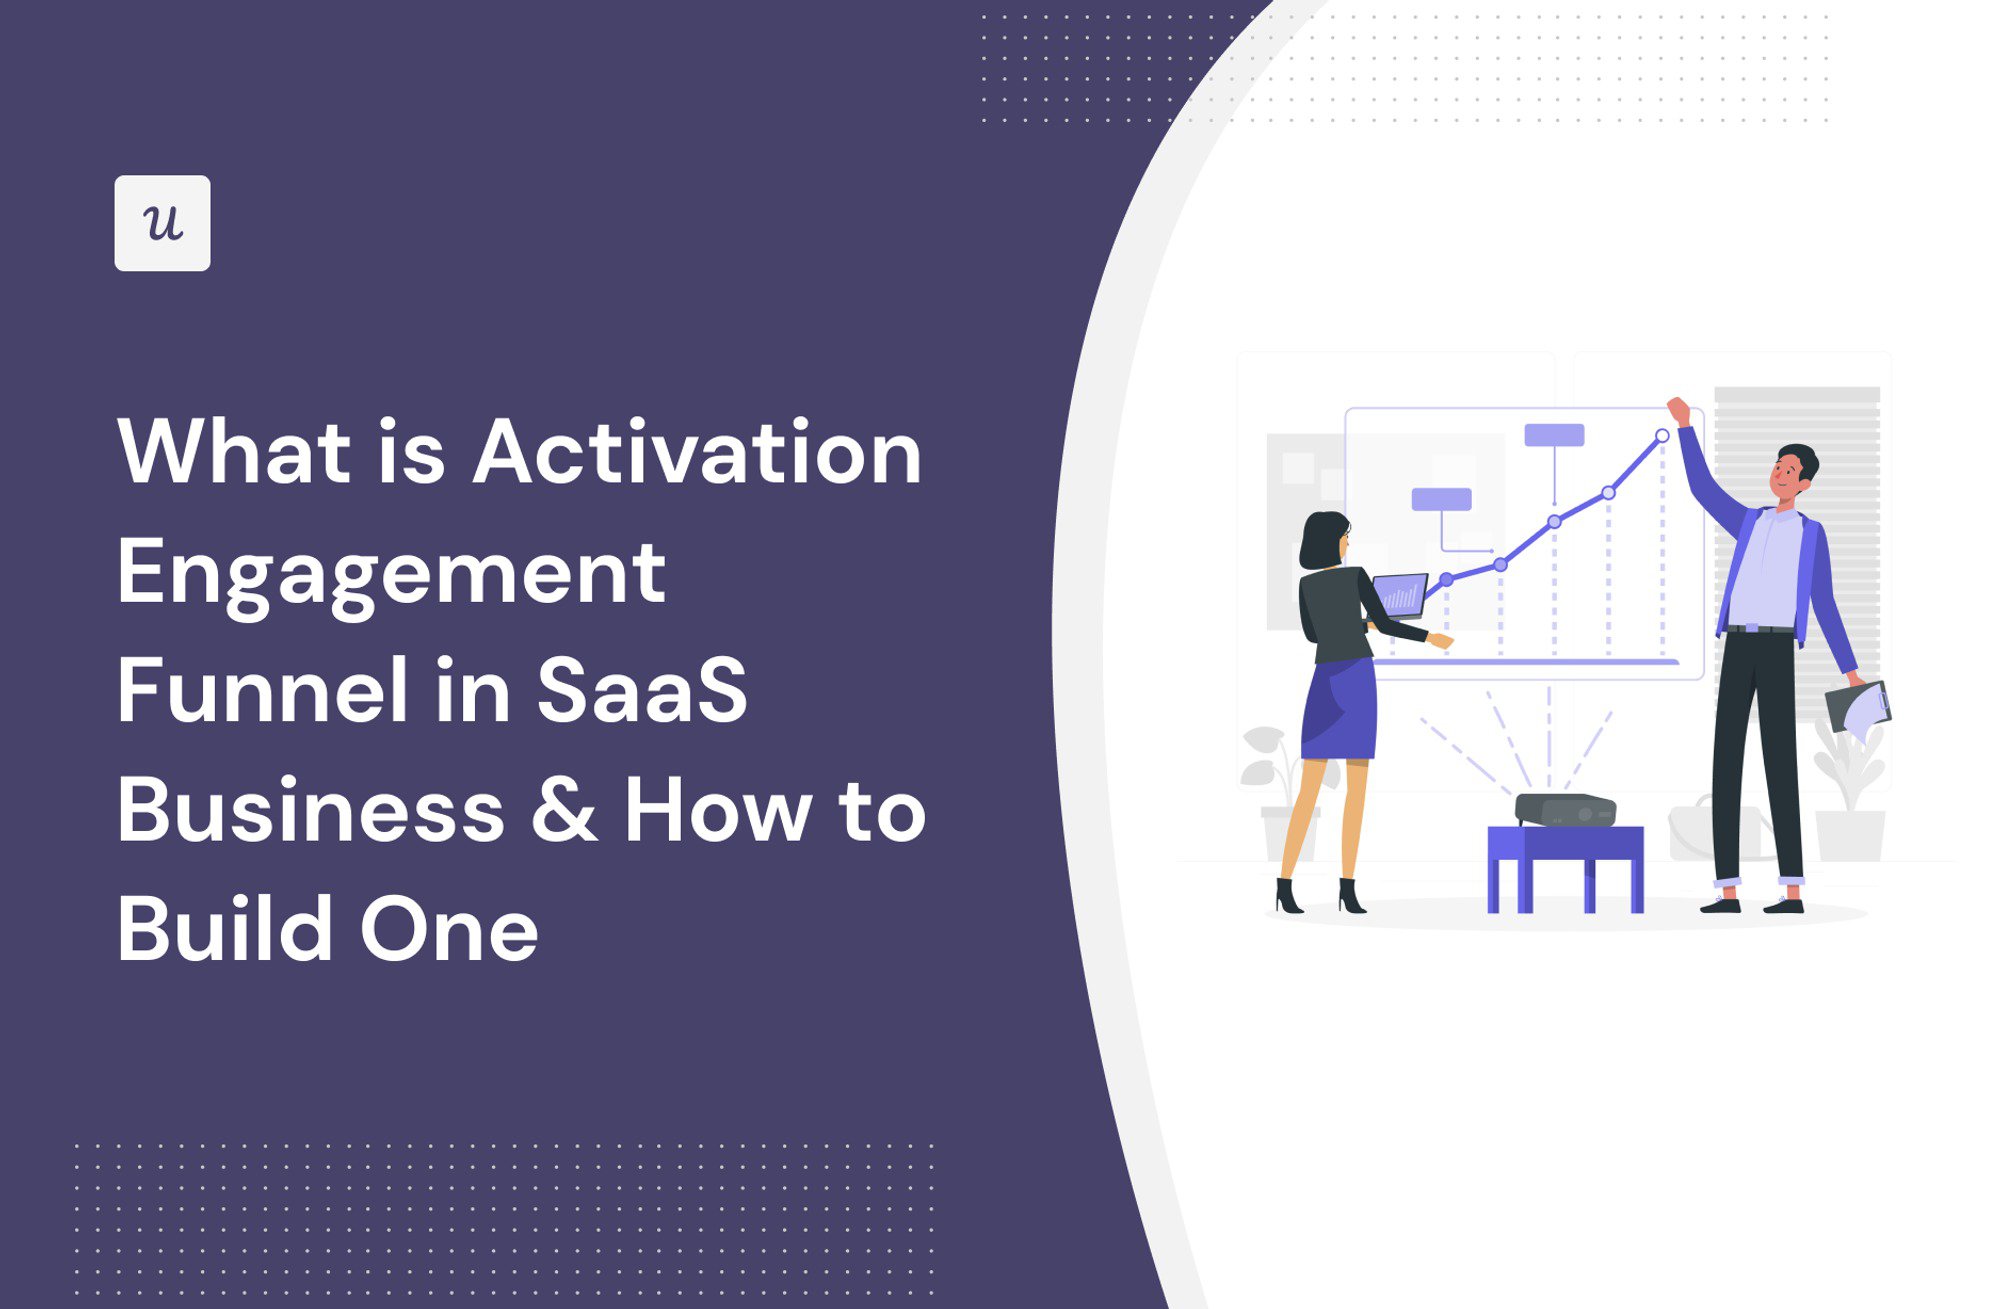 What is Activation Engagement Funnel in SaaS Business & How to Build One cover